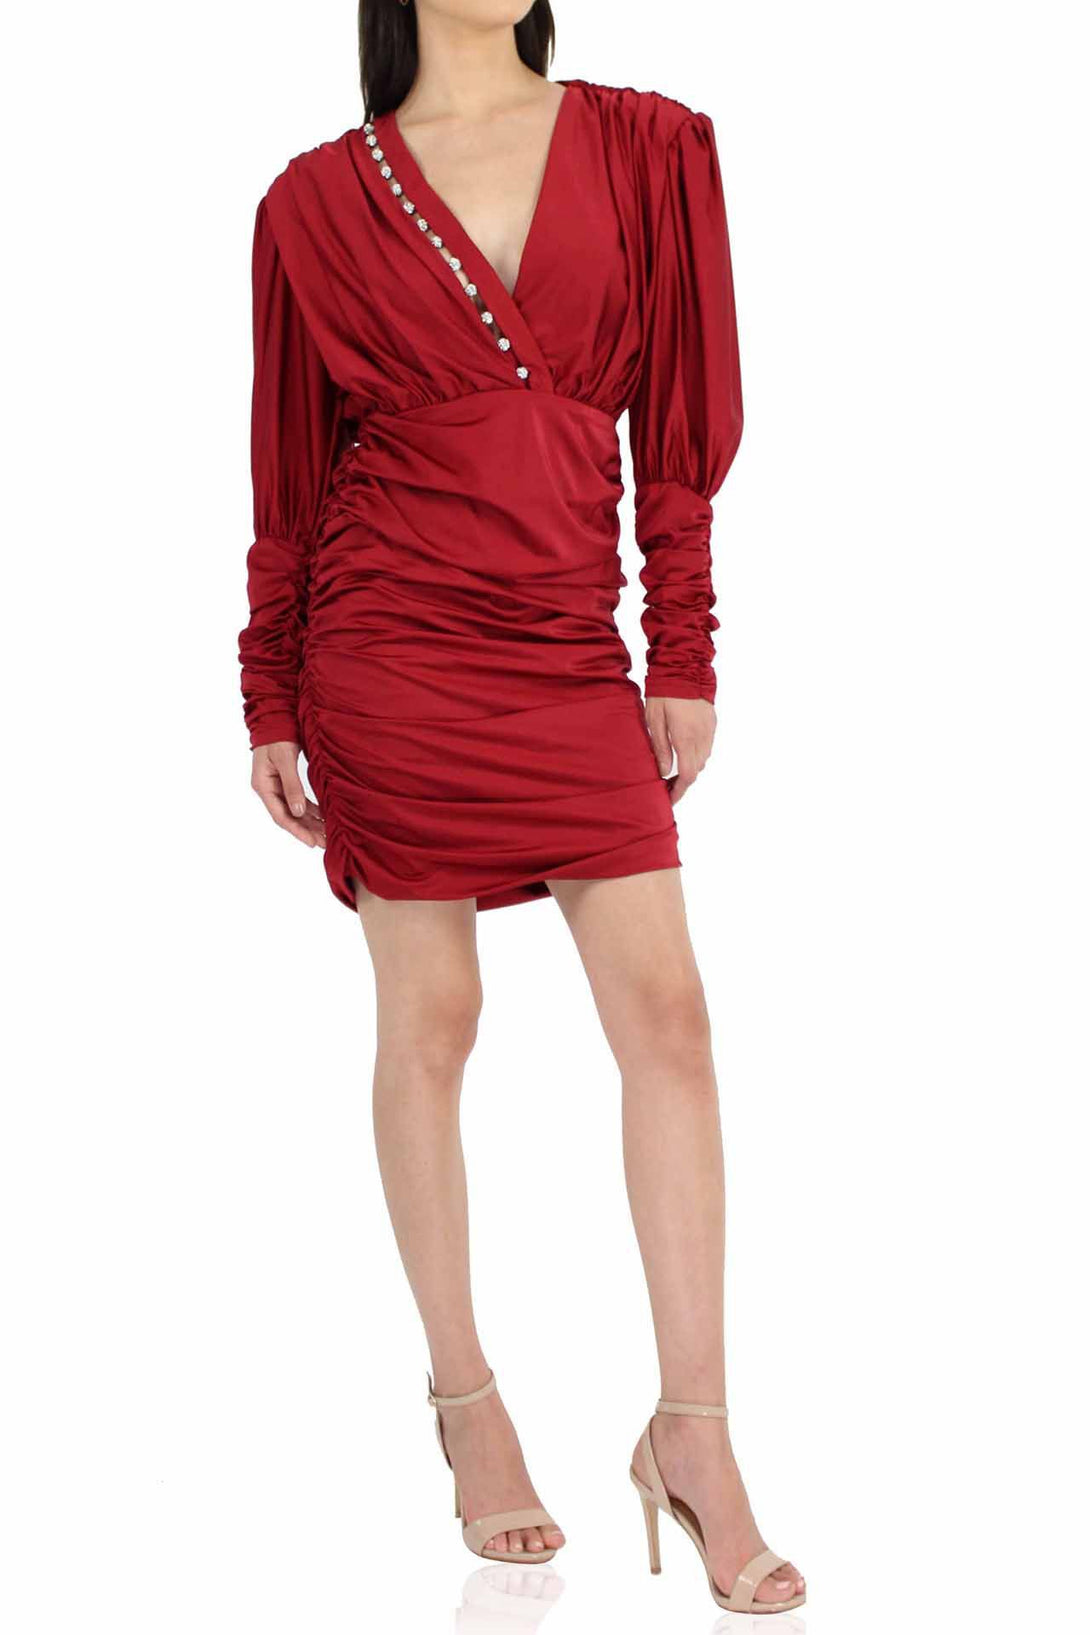 Mini-Dress-In-Red-From-Kyle